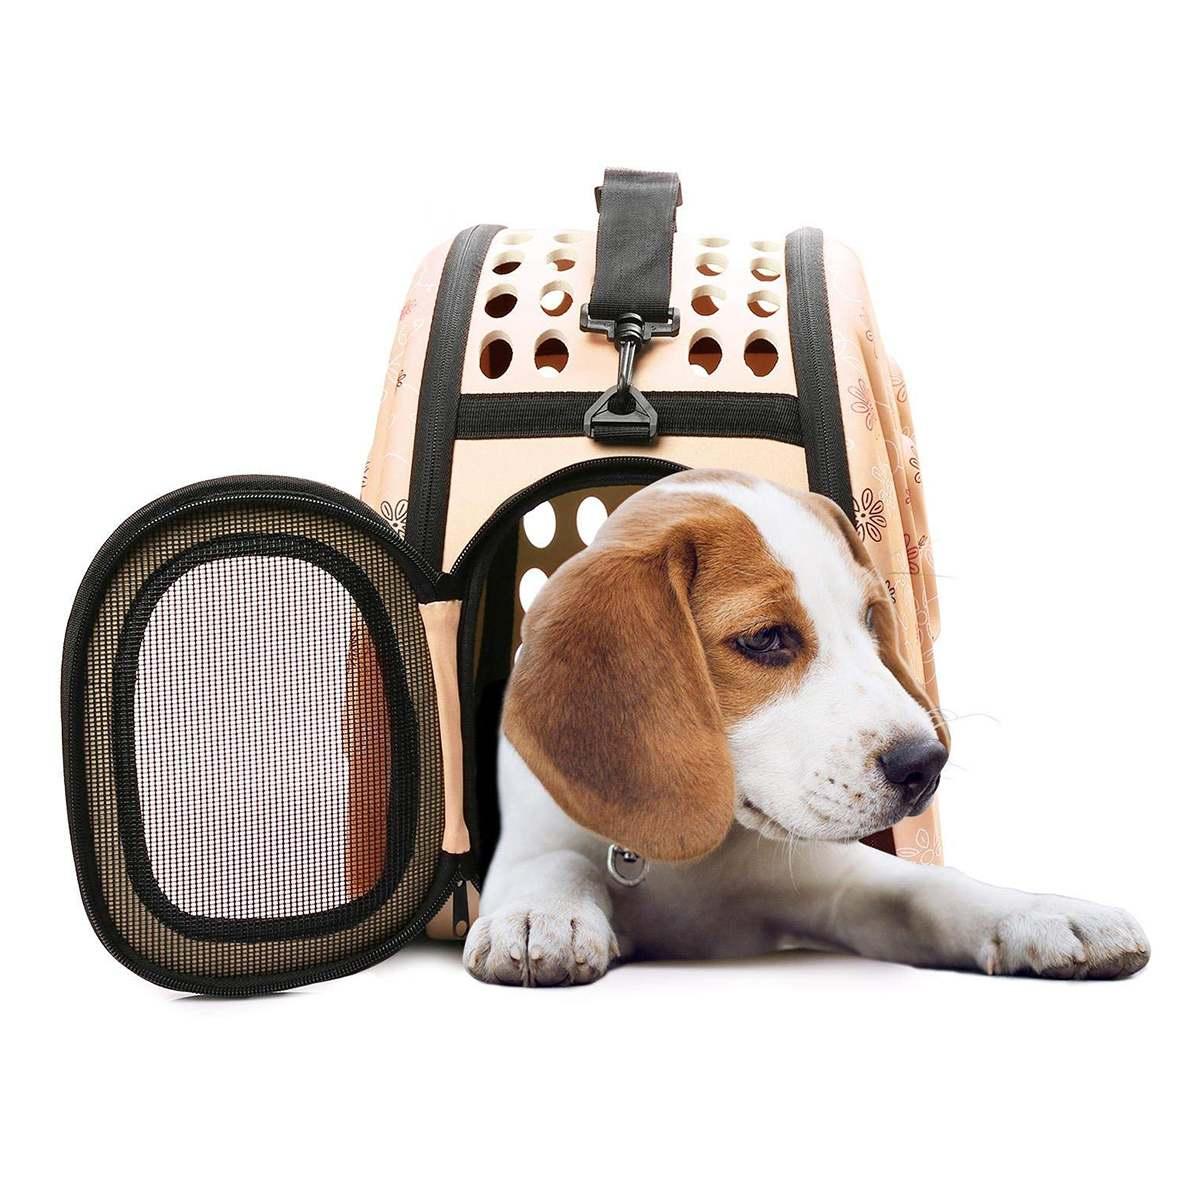 New Portable Carrying Pet Dog Cat Pack Transport Carrier Bag